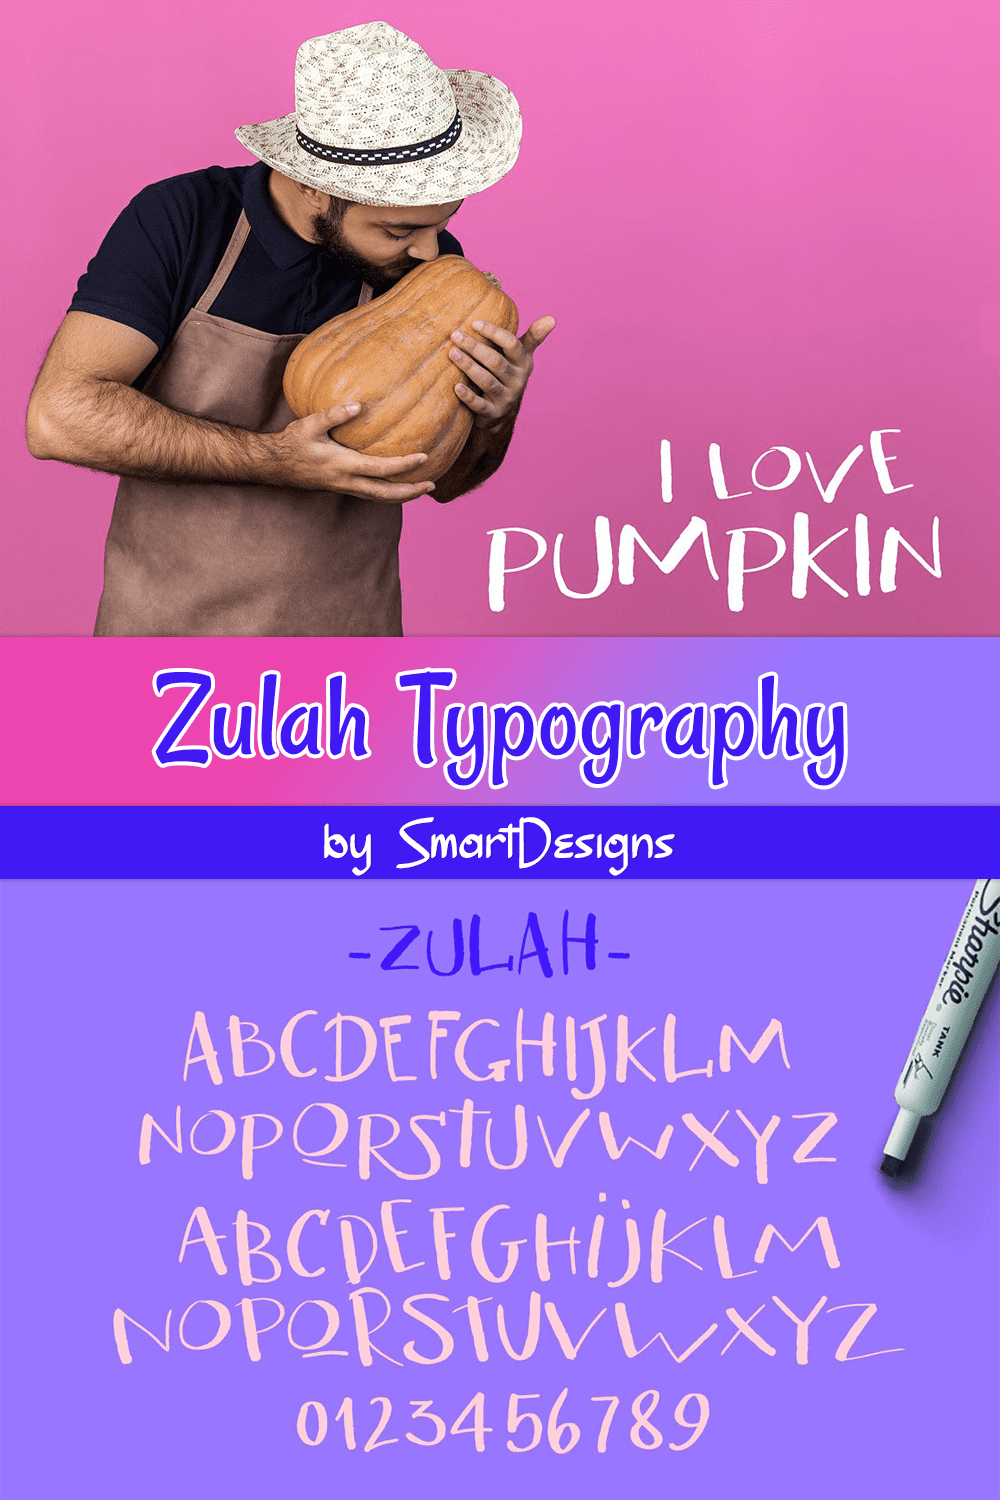 Pinterest images with inscriptions in a font from a package and a man with a pumpkin.